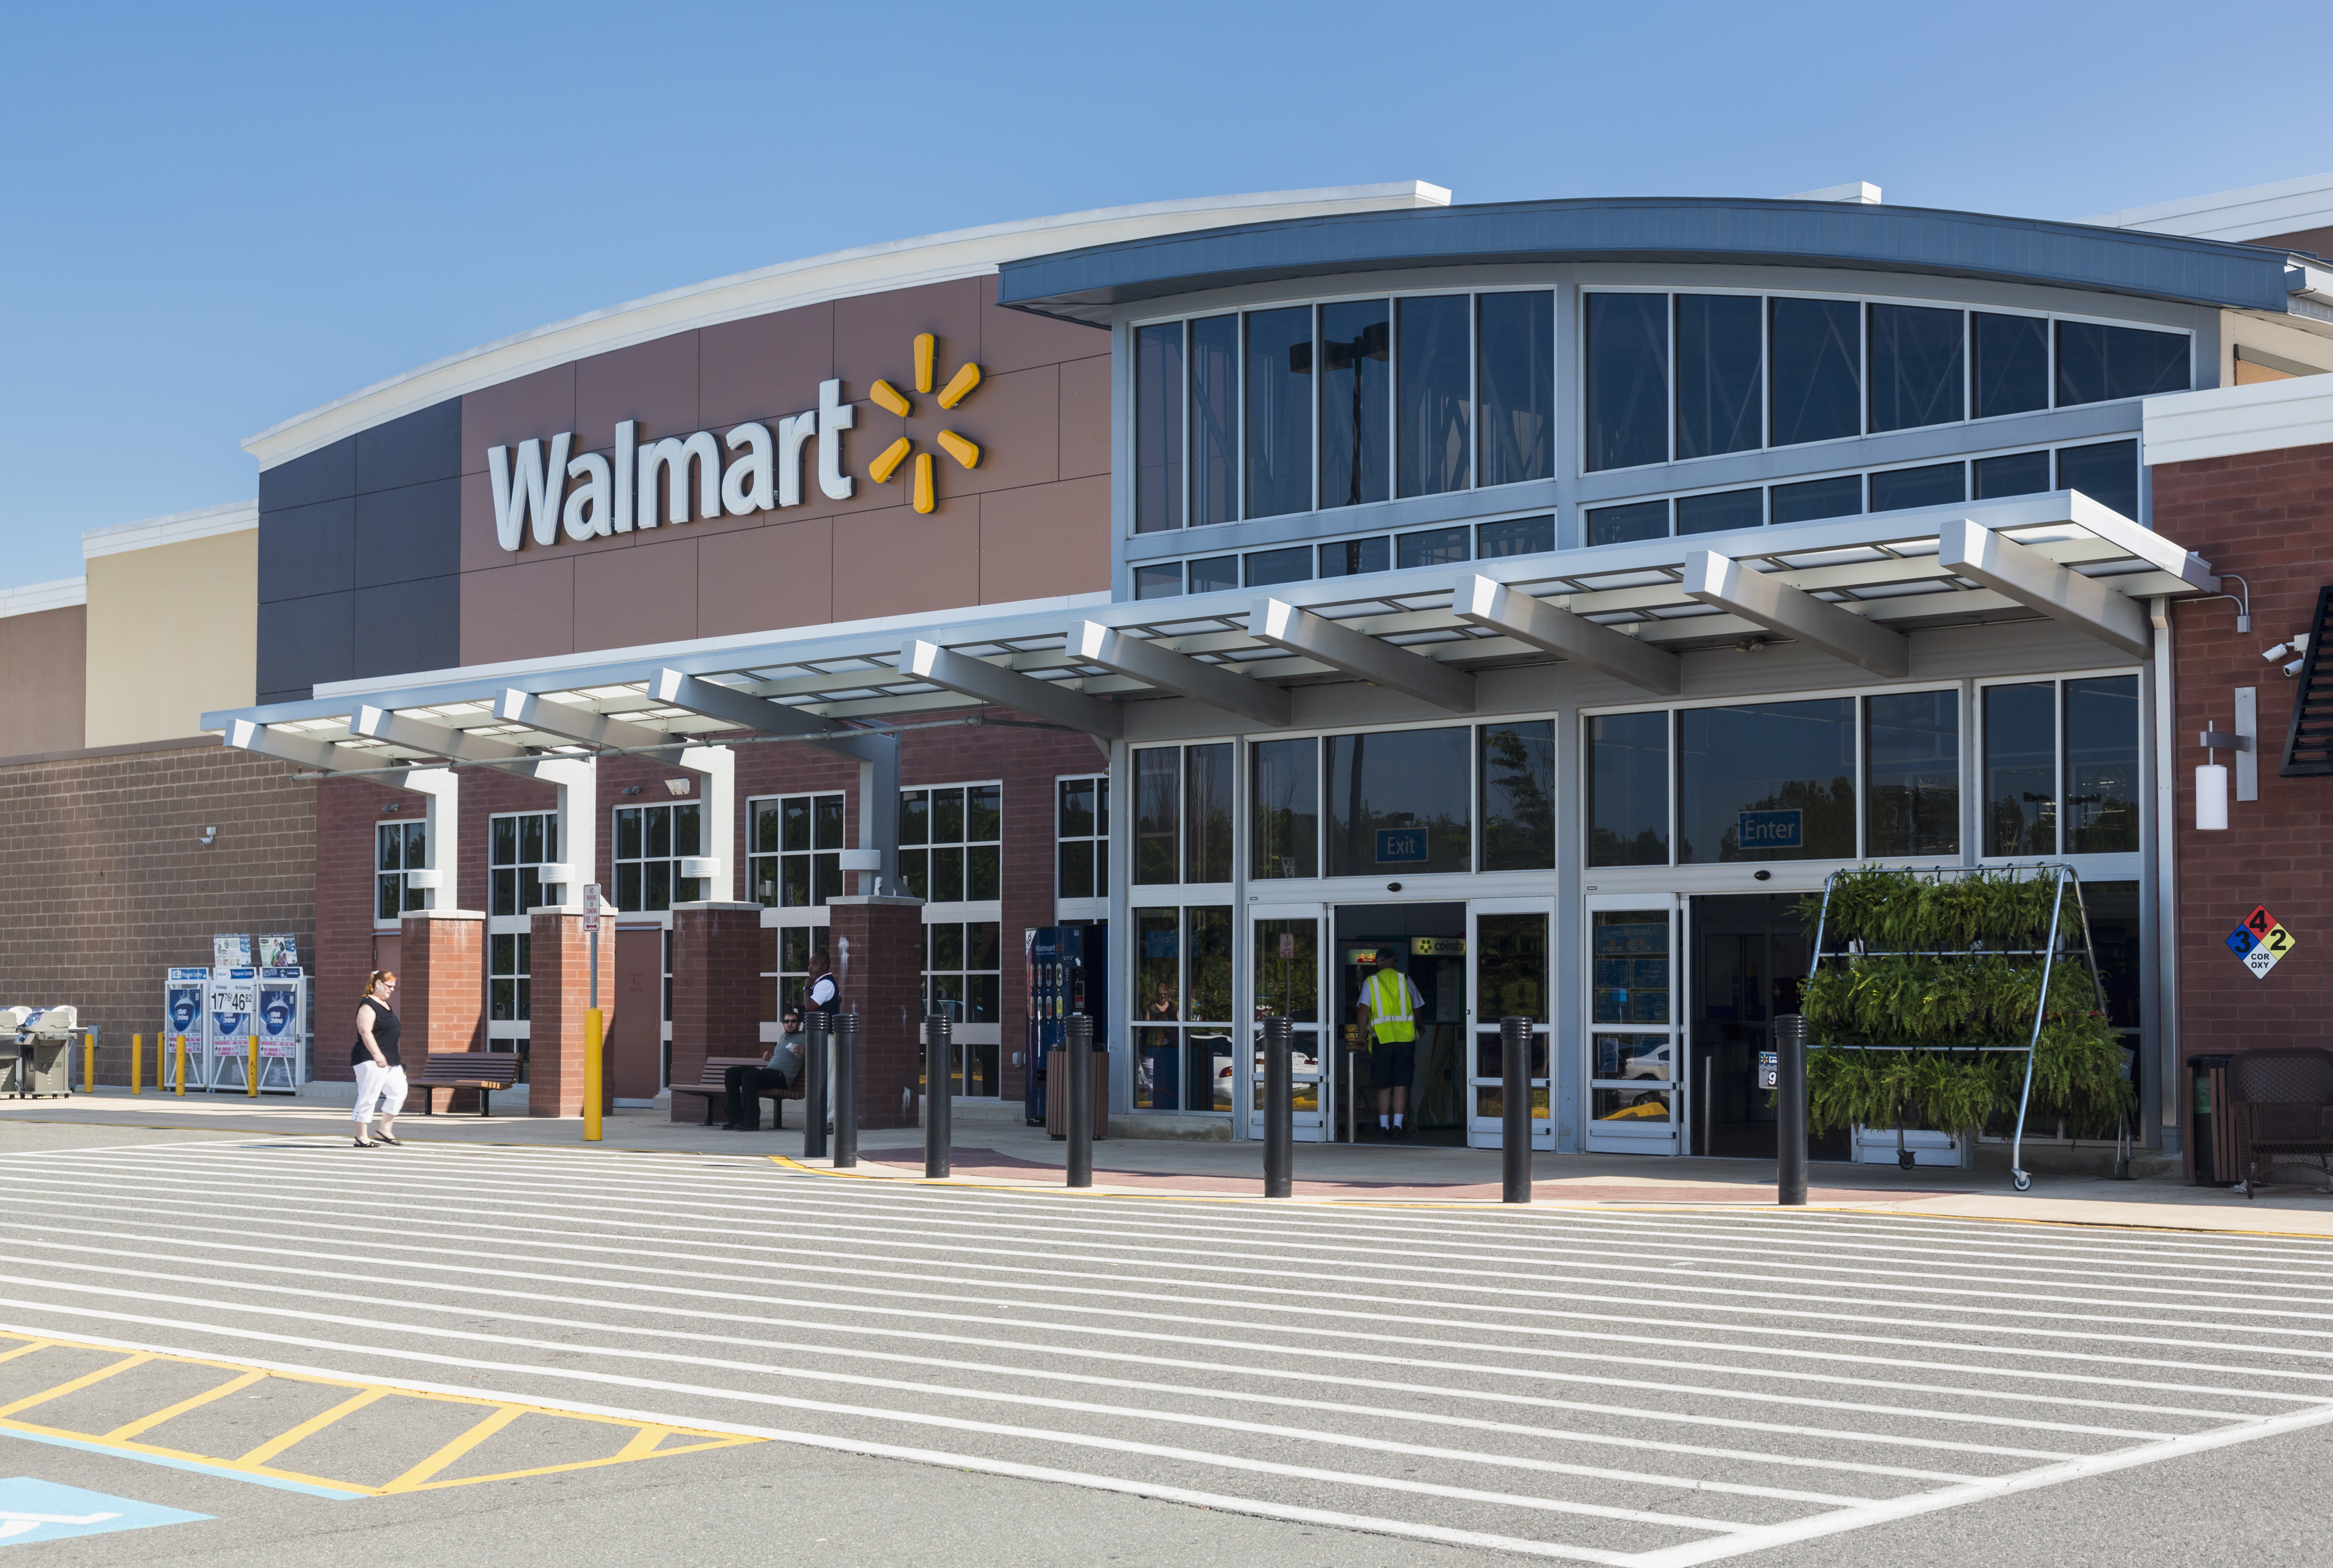 The facade of a Walmart store | Source: Getty Images